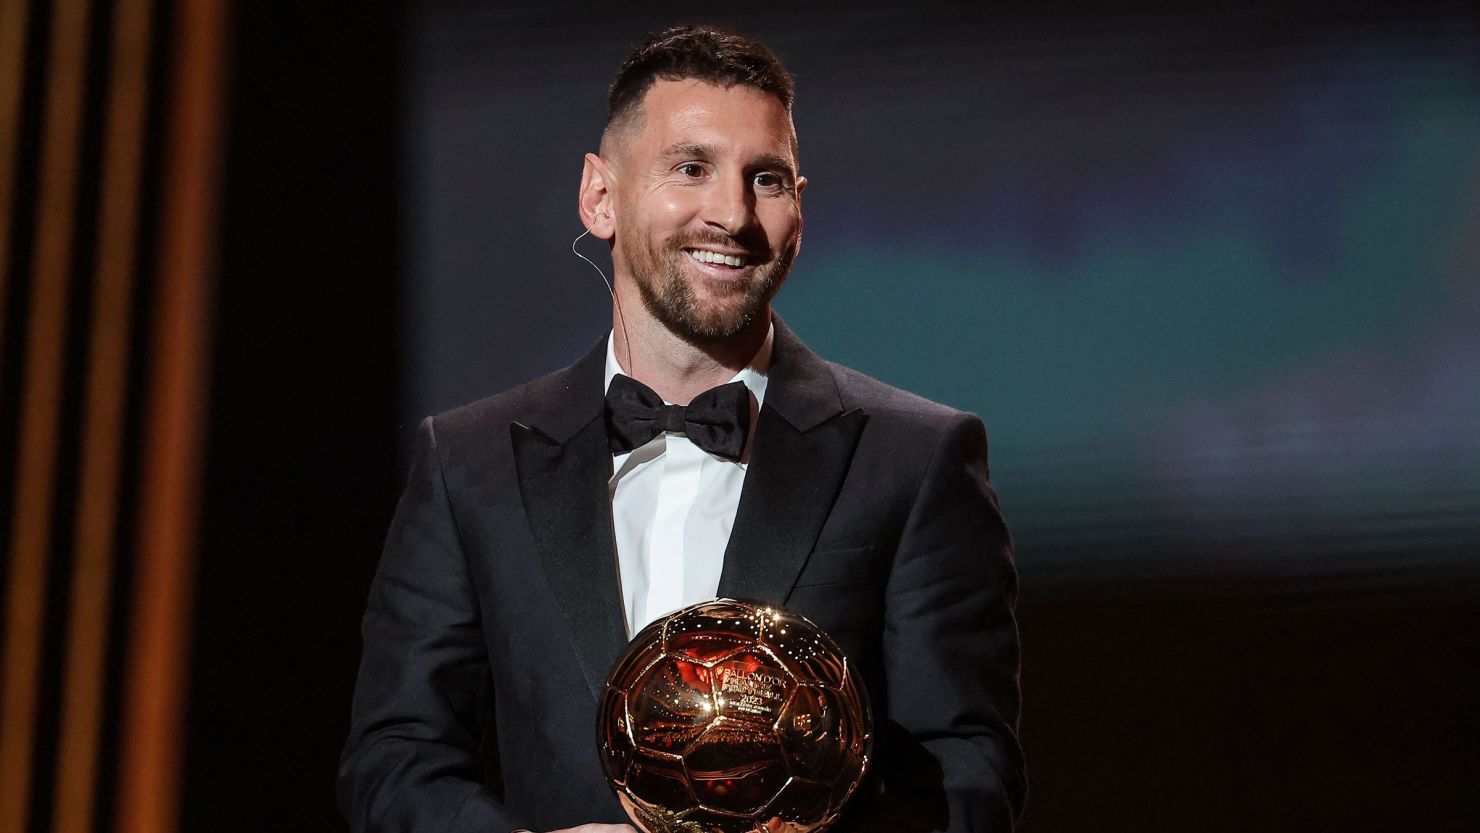 Lionel Messi won a record-extending eighth Ballon d'Or in Paris on October 30.